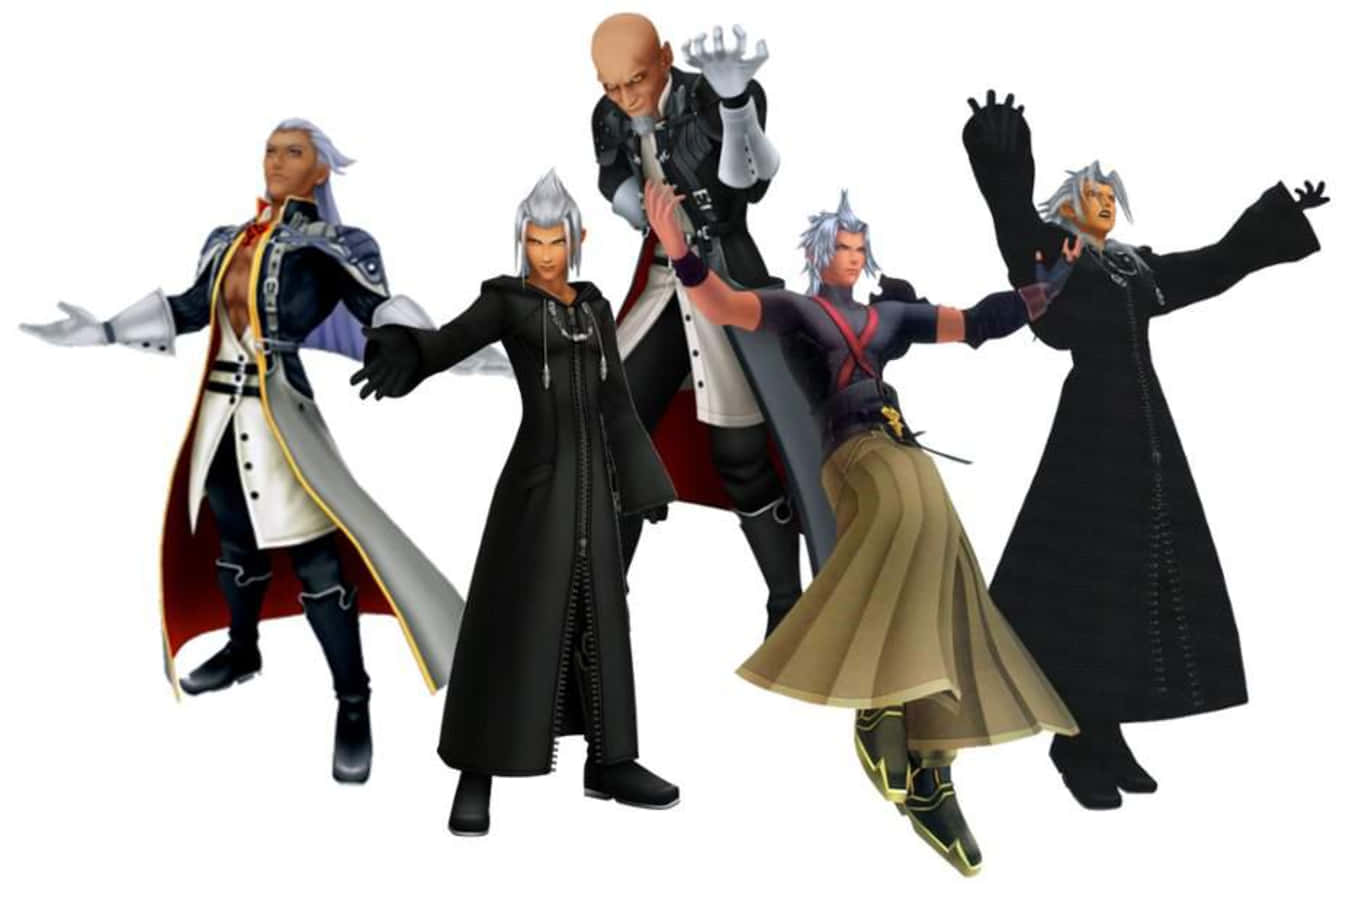 Caption: The Imposing Xehanort Unleashed in Kingdom Hearts Wallpaper